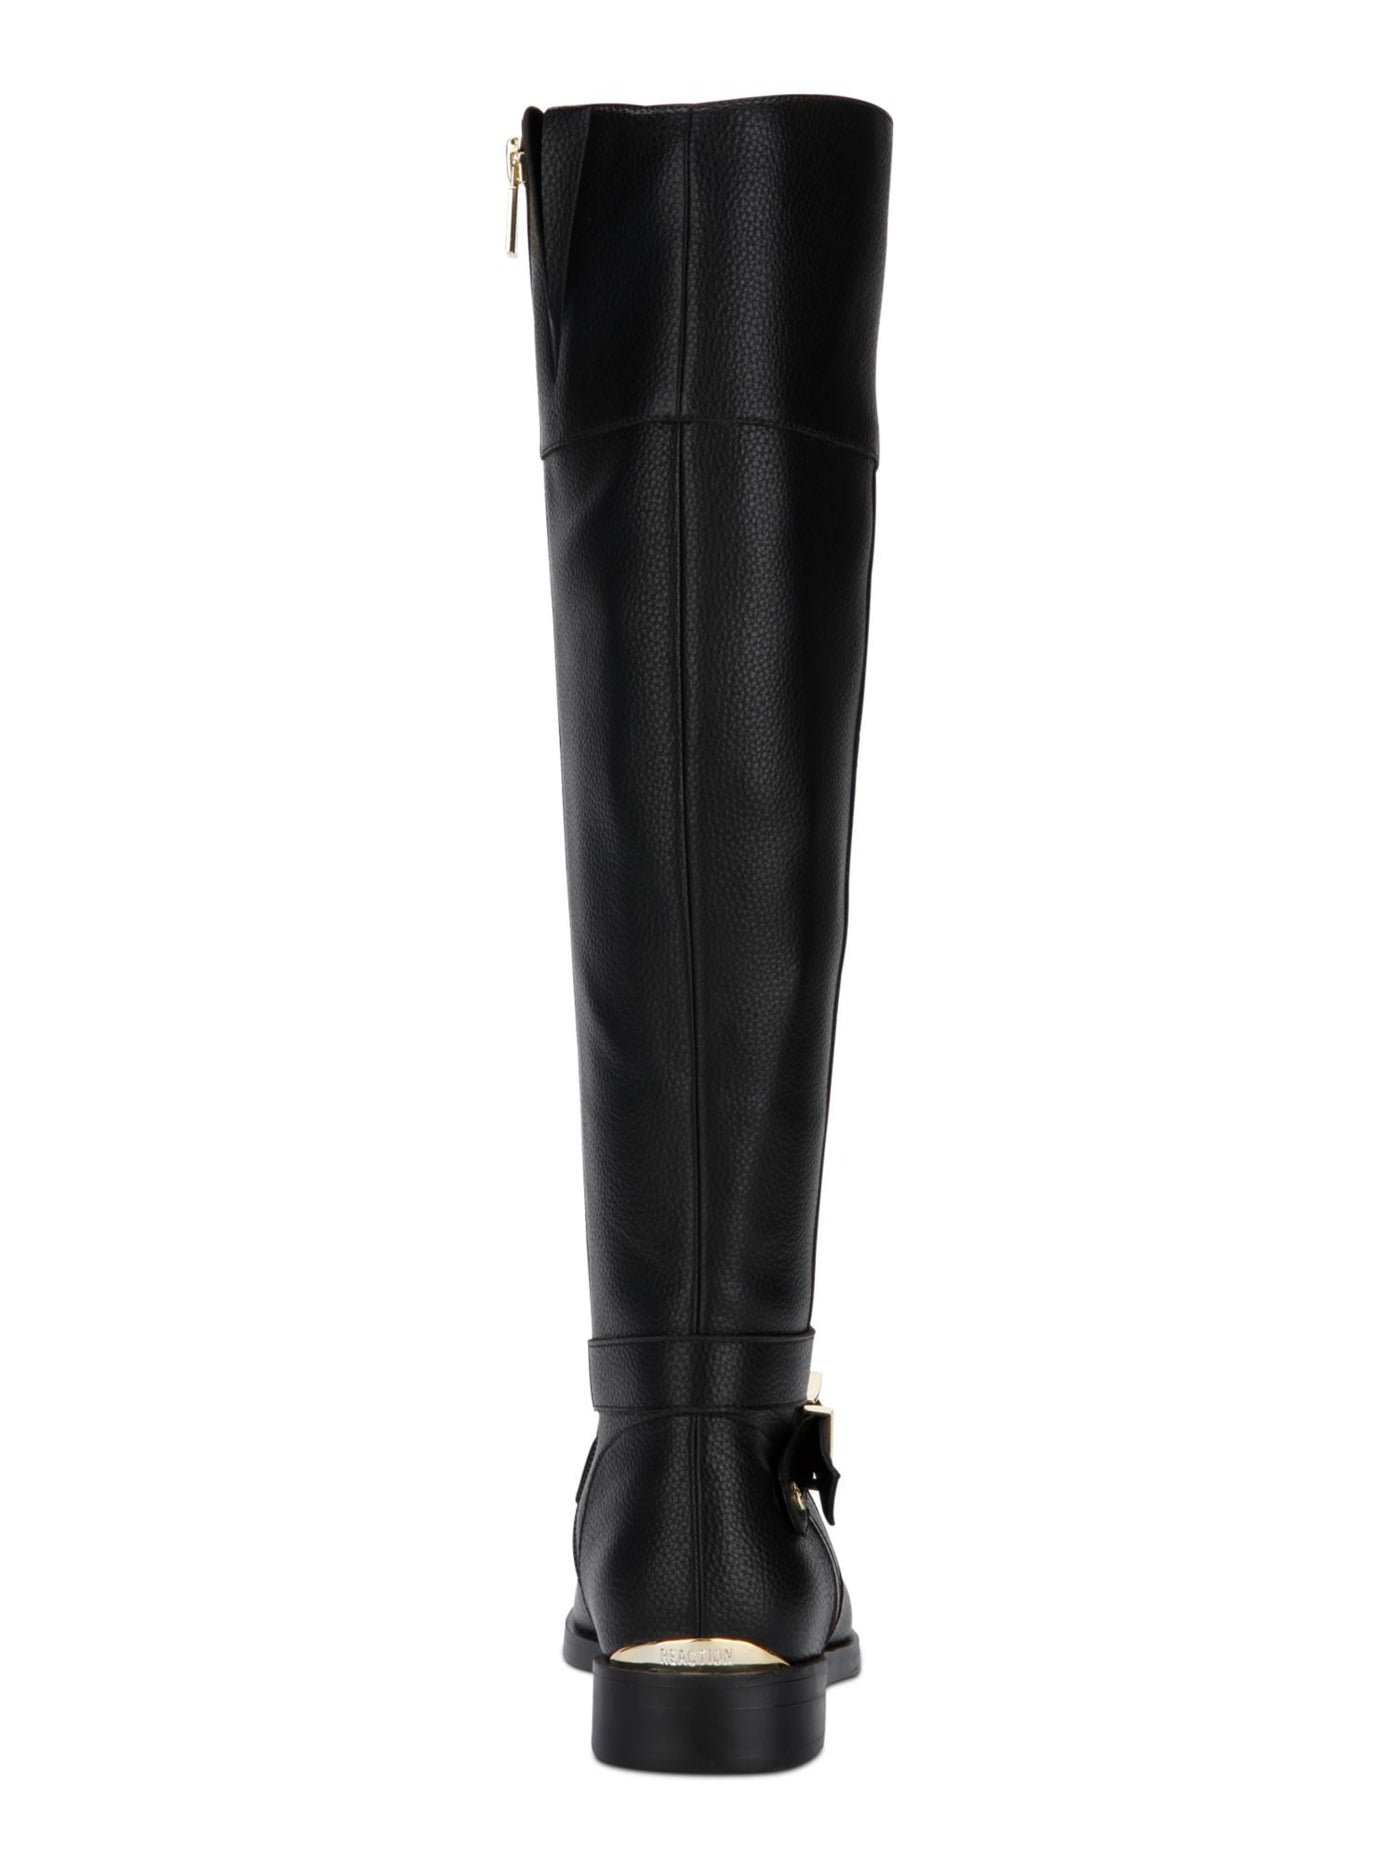 REACTIVE Womens Black Thermoplastic Sole Gold Heel Accent Buckle Accent Wind Almond Toe Zip-Up Riding Boot 6.5 M